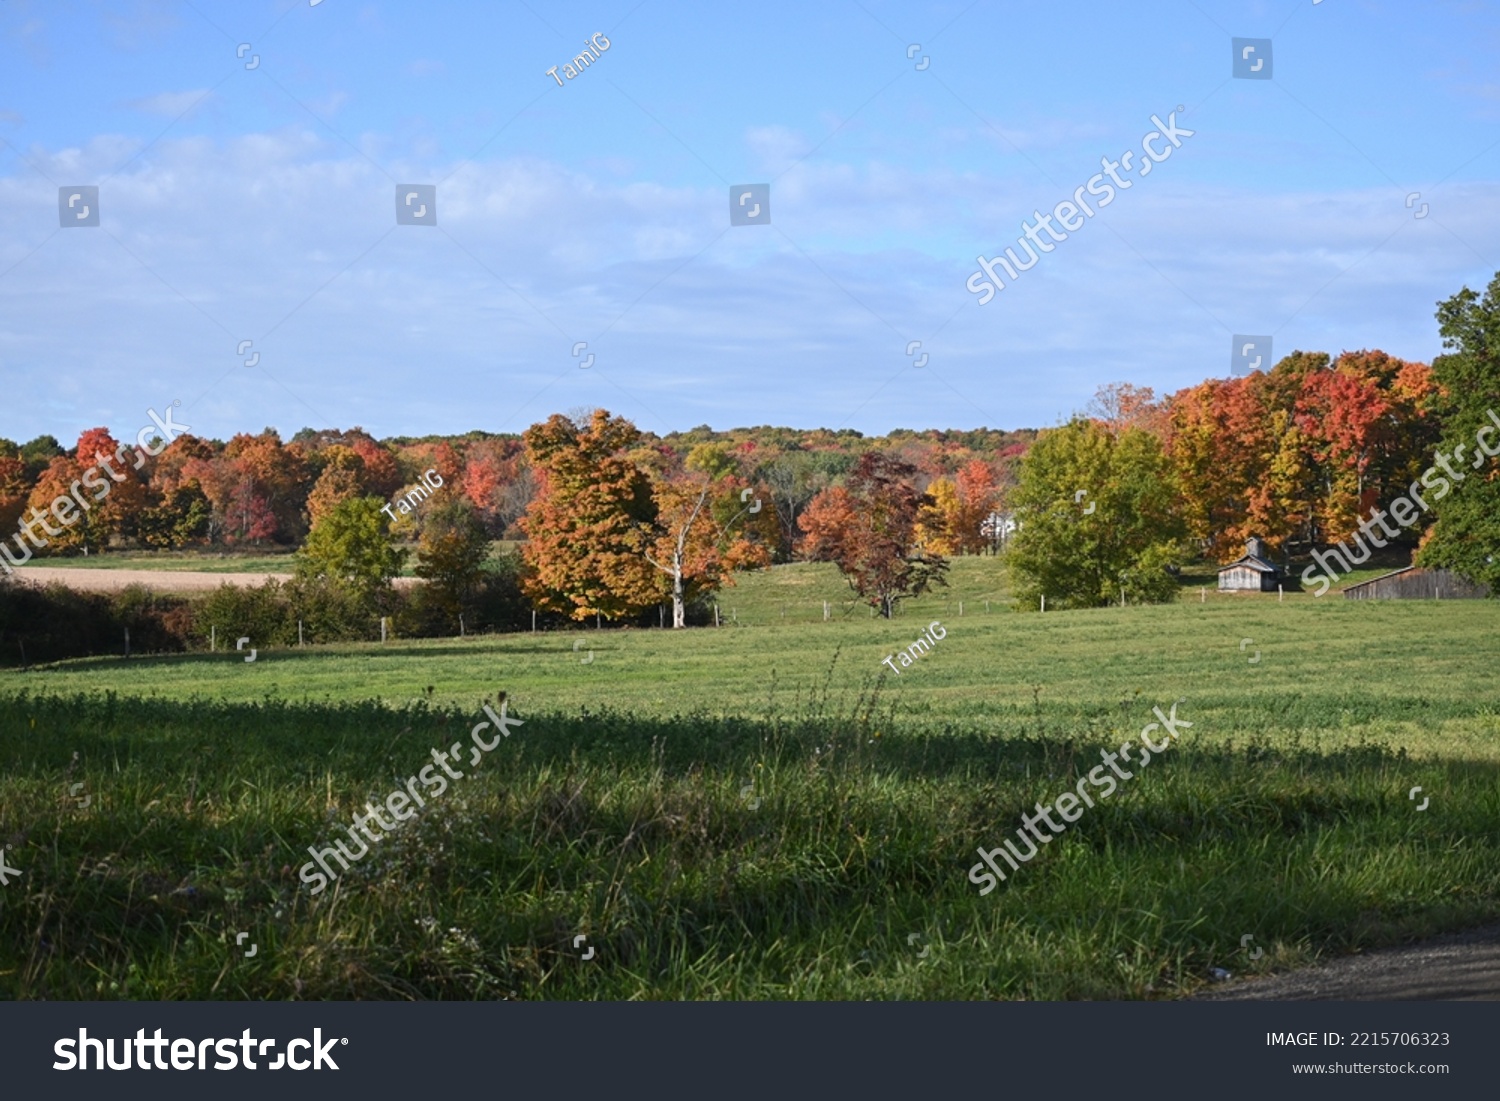 Amish sugarhouse in the autumn countryside #2215706323